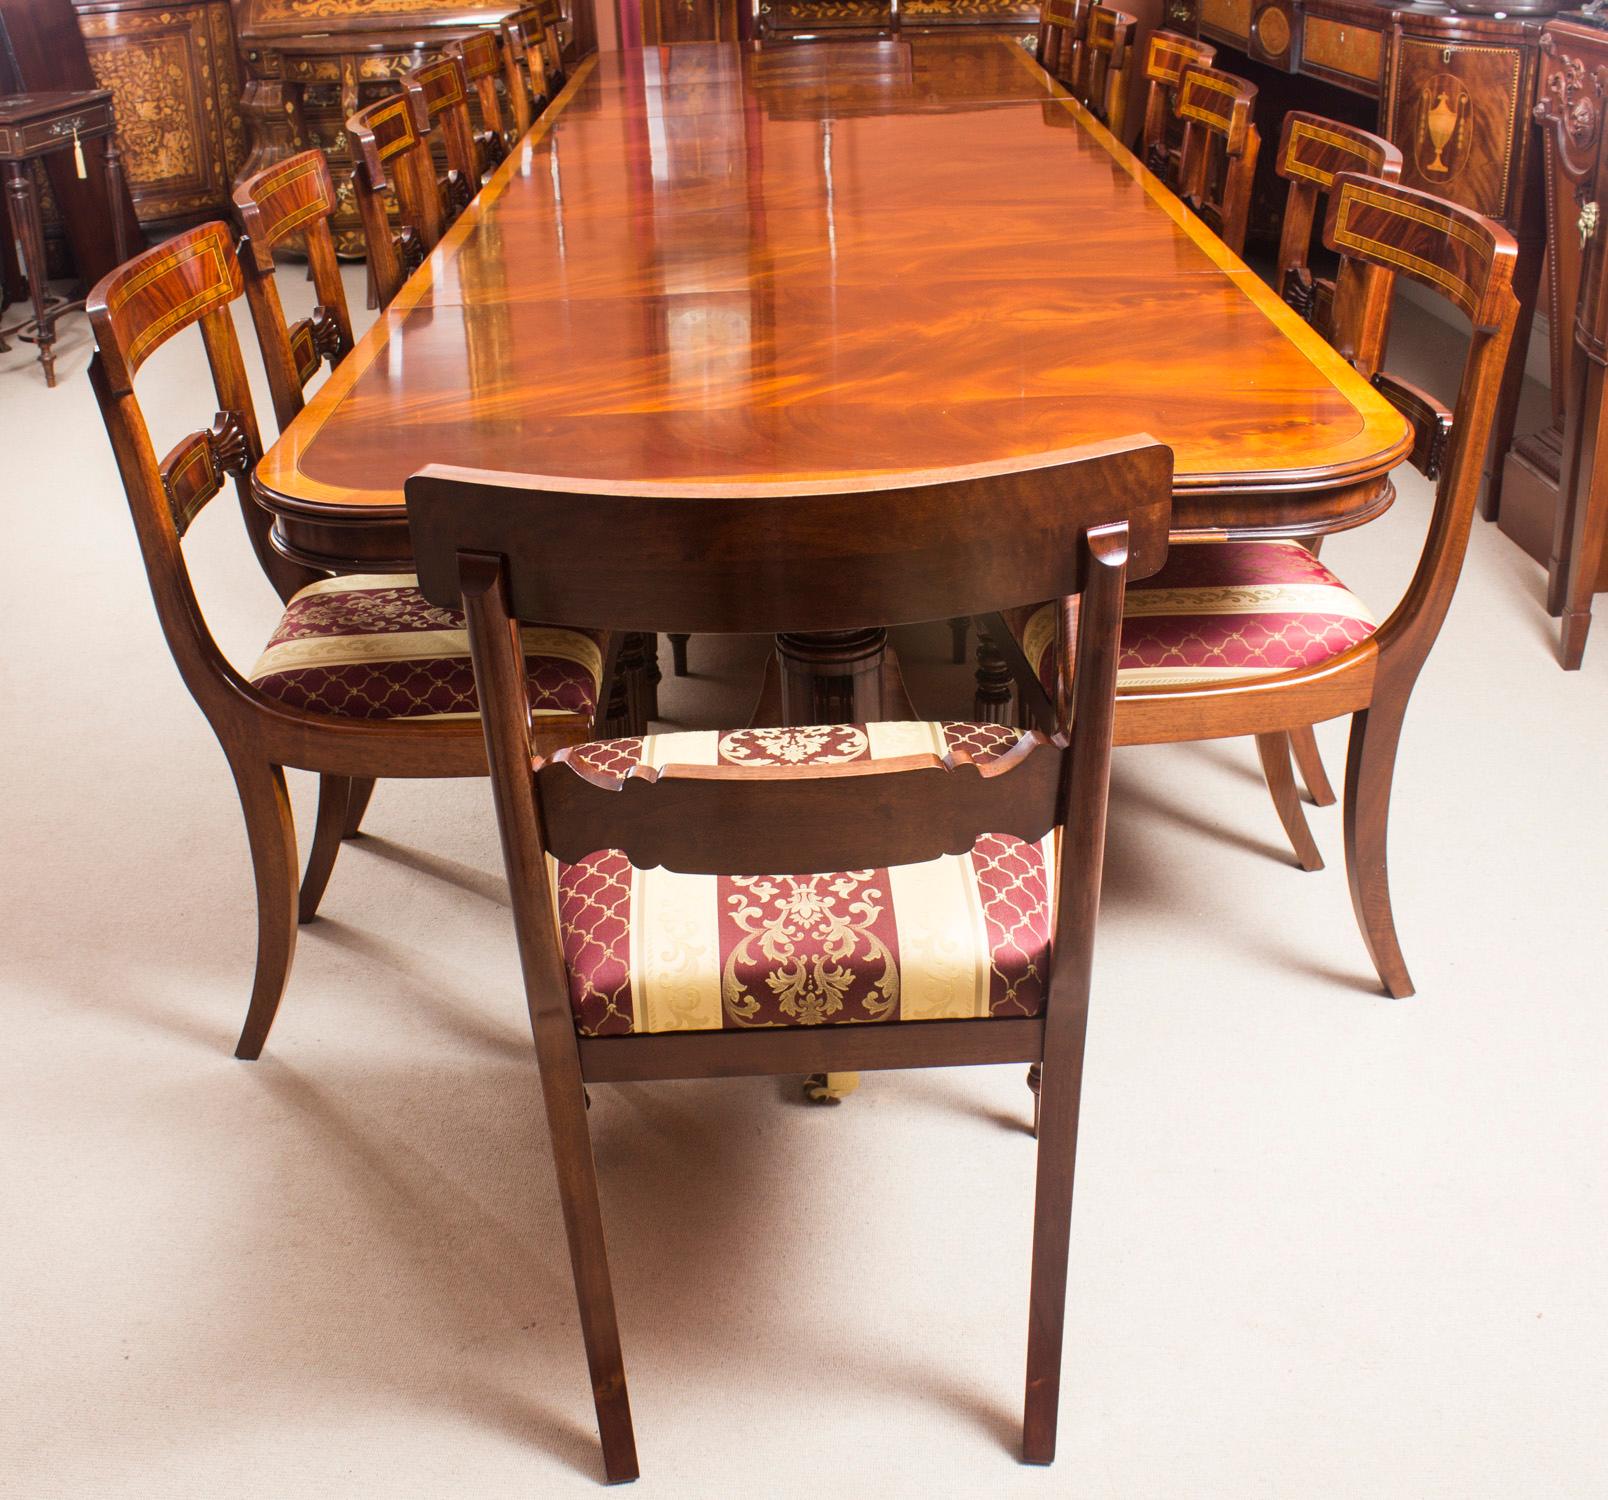 This is a superb vintage Regency Revival dining set crafted in flame mahogany and featuring superb satinwood crossbanded decoration to the table and chairs. dating from the  second half of the 20th Century.

It comprises a Regency Revival dining